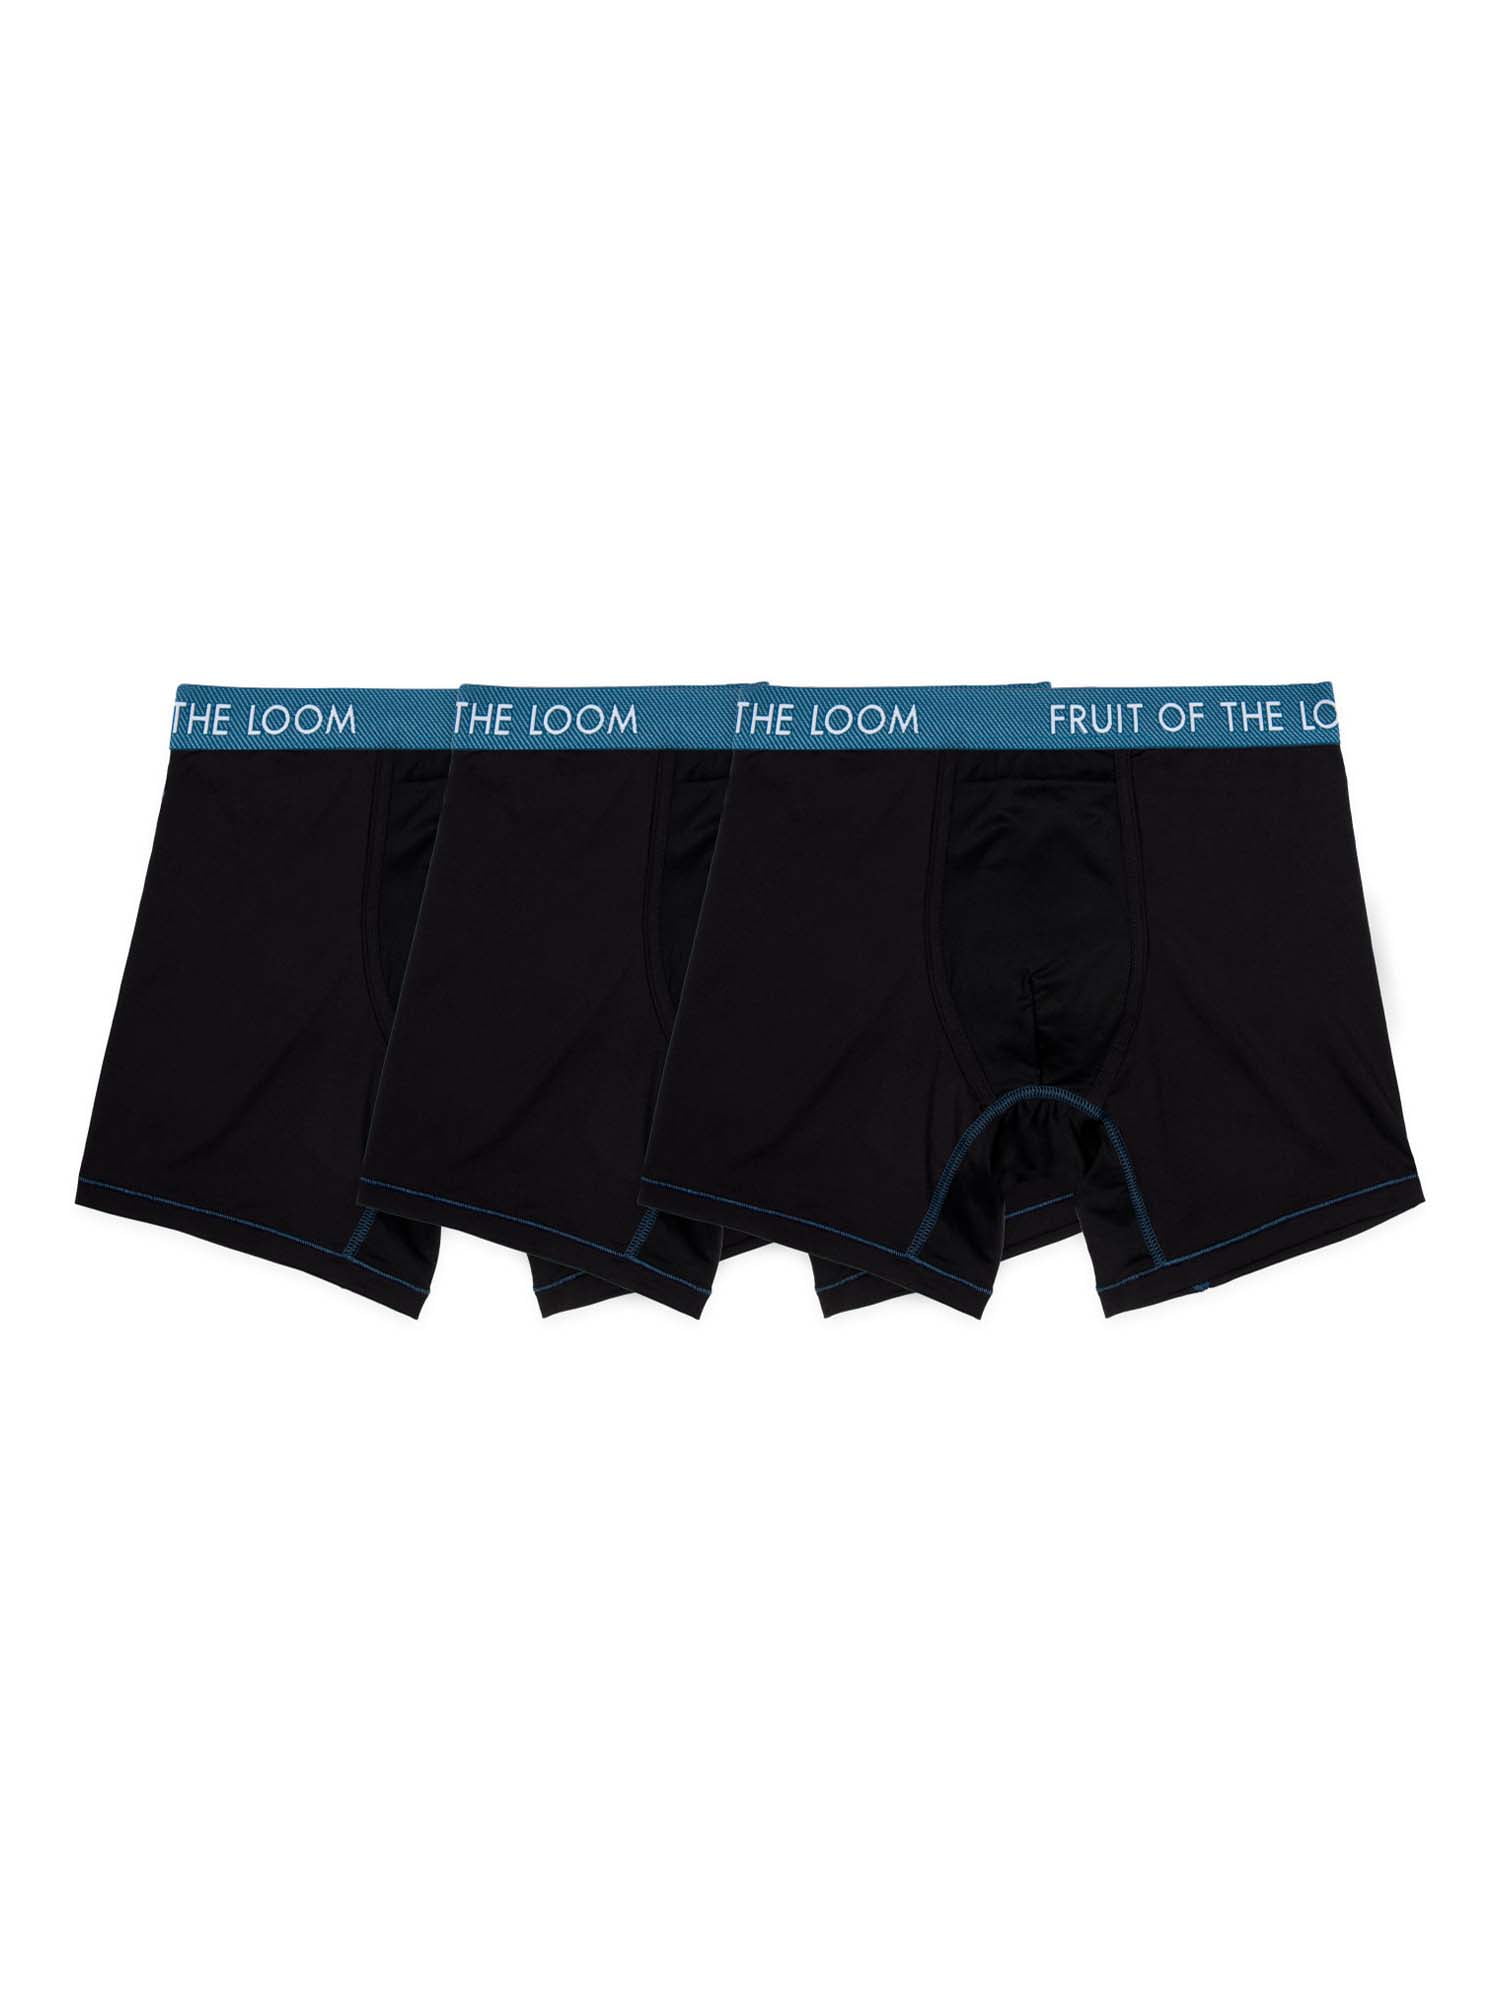 Fruit of the Loom Men's Getaway Collection Boxer Briefs, 3 Pack ...